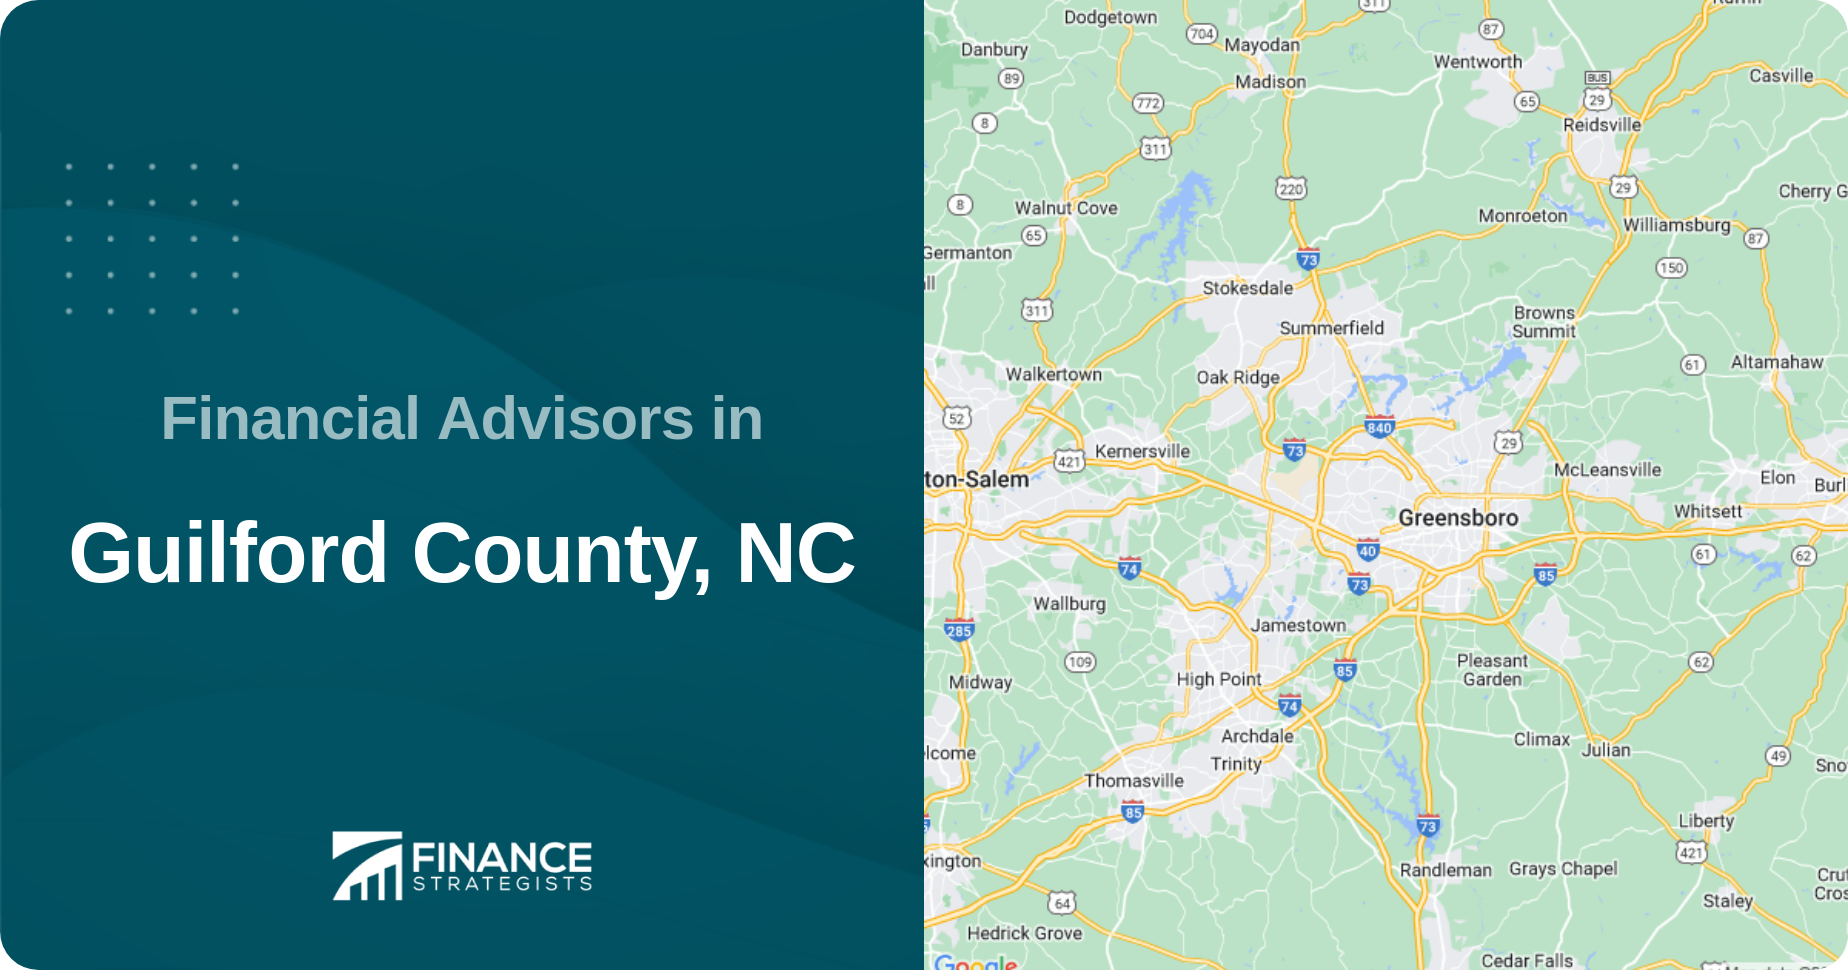 Financial Advisors in Guilford County, NC